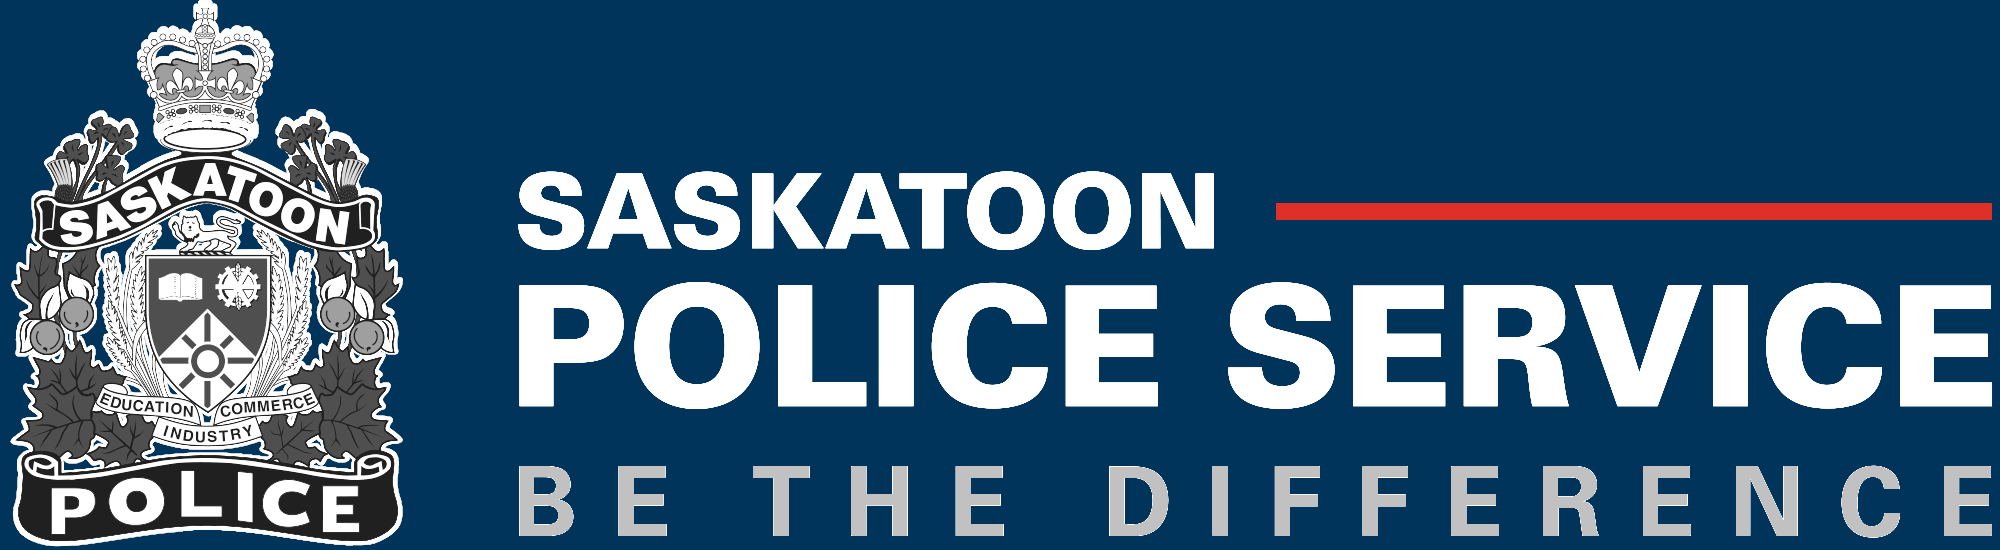 Saskatoon Police Service: Be the Difference.